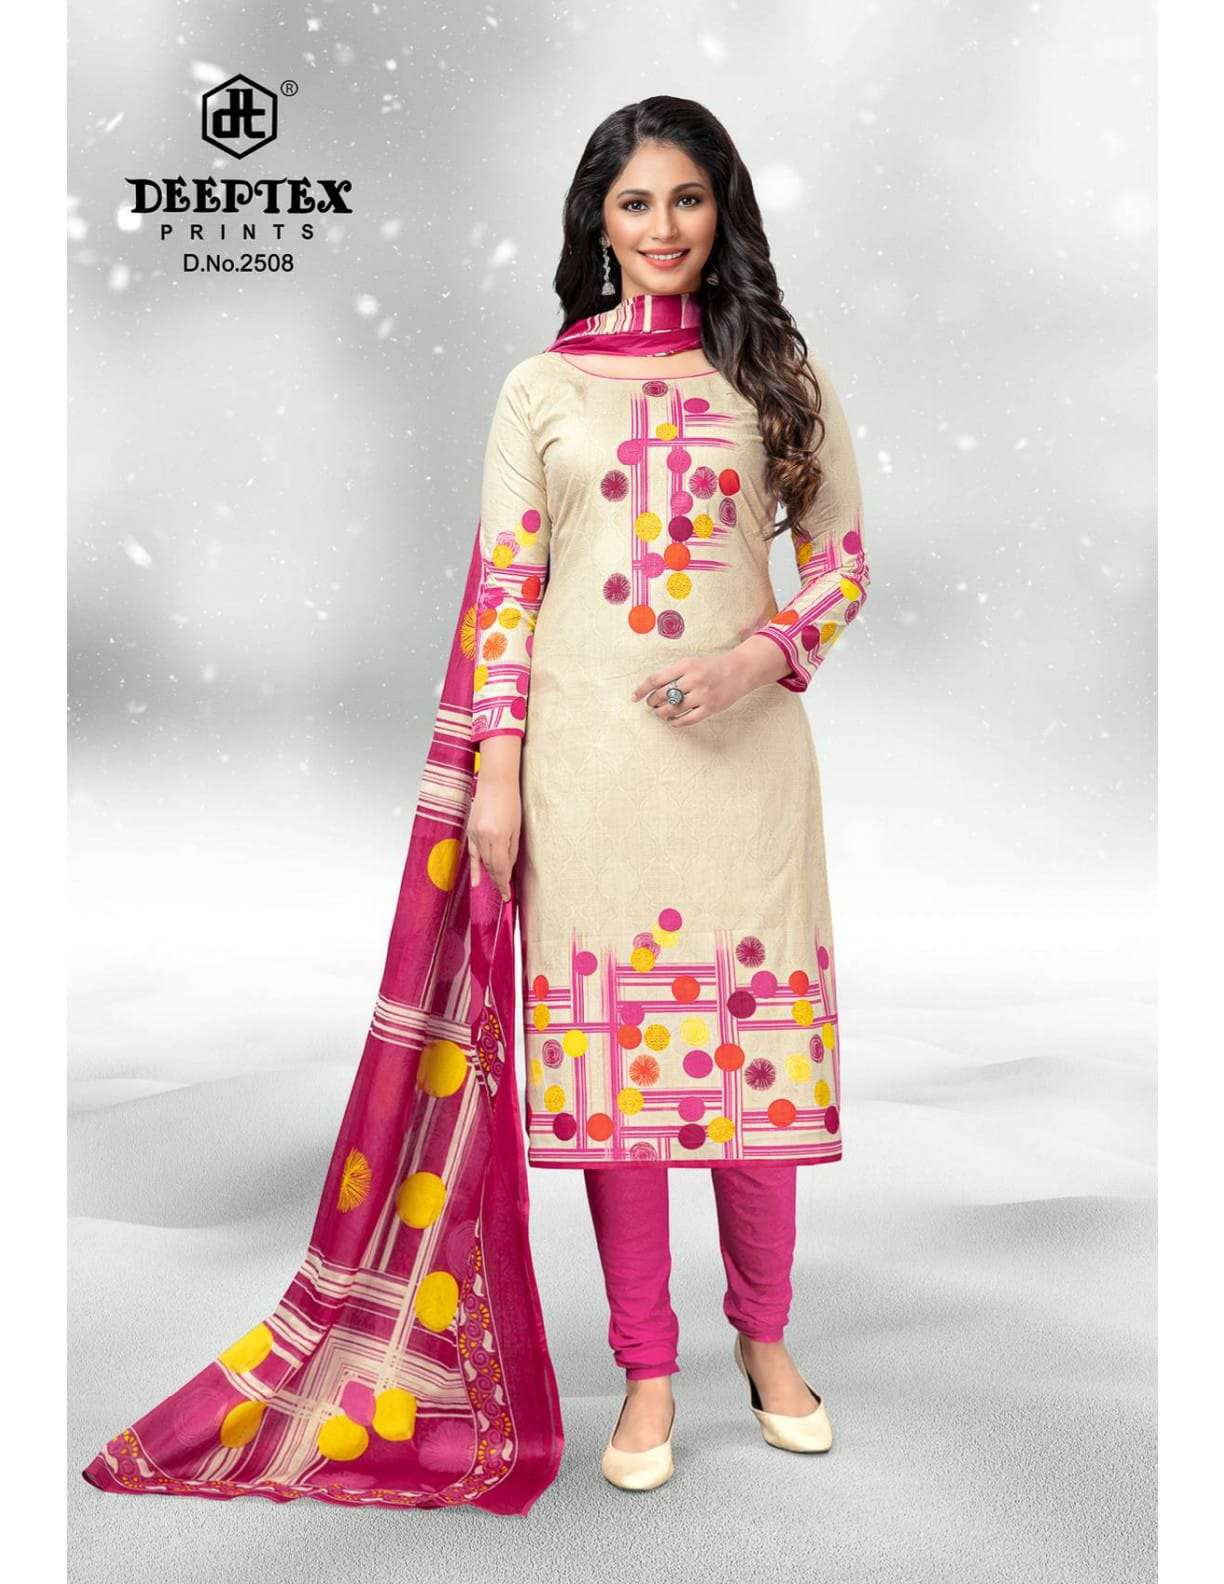 Deeptex Chiefguest Vol 25 Printed Cotton Drees Material Exporter